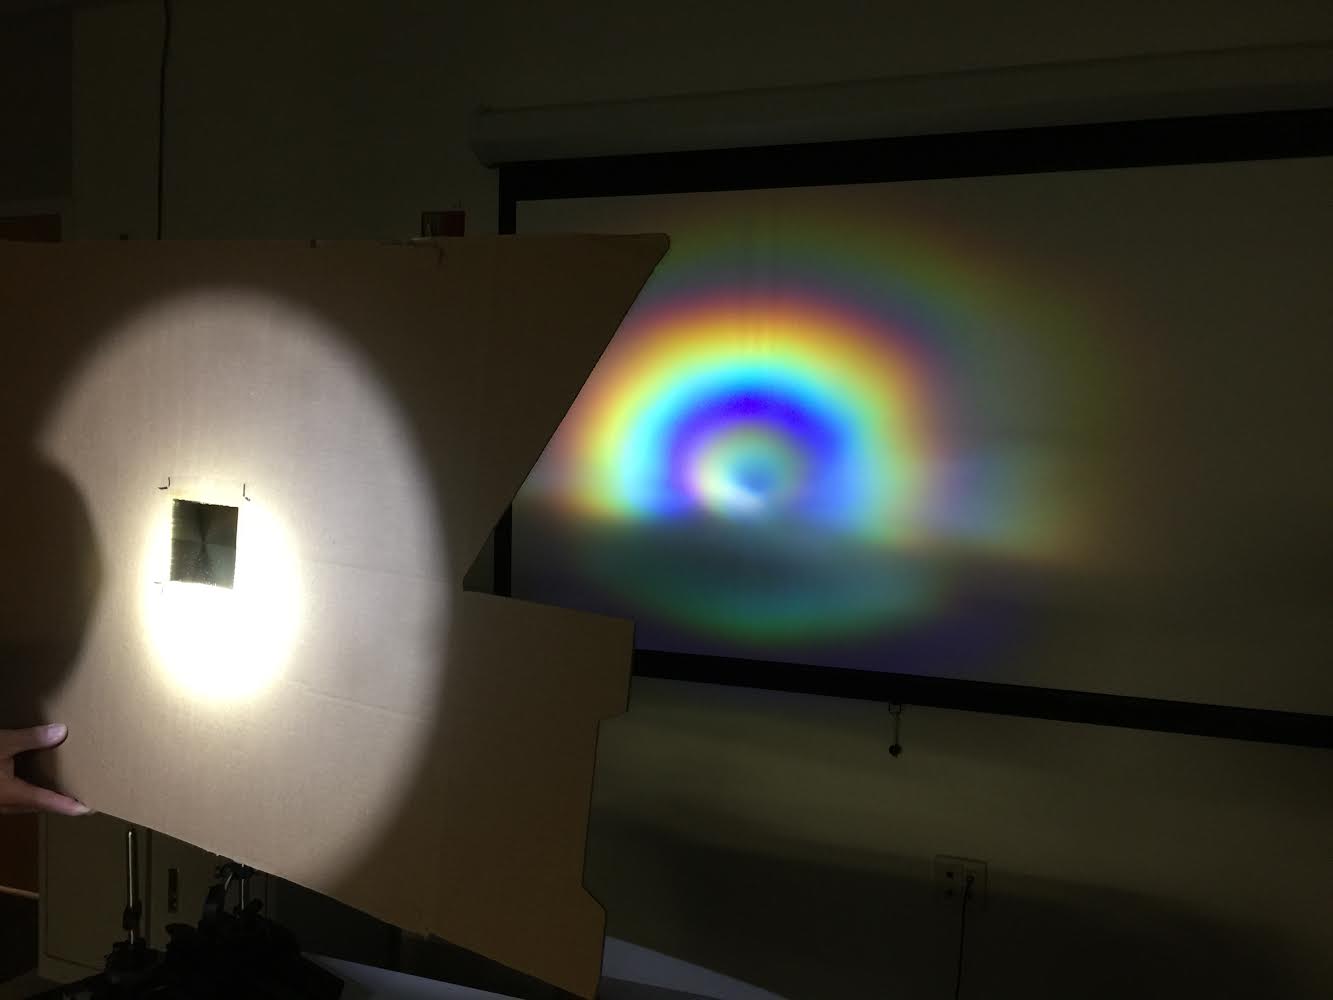 This Giant Rainbow Was Made With Tech That’s Used To Study Exoplanets